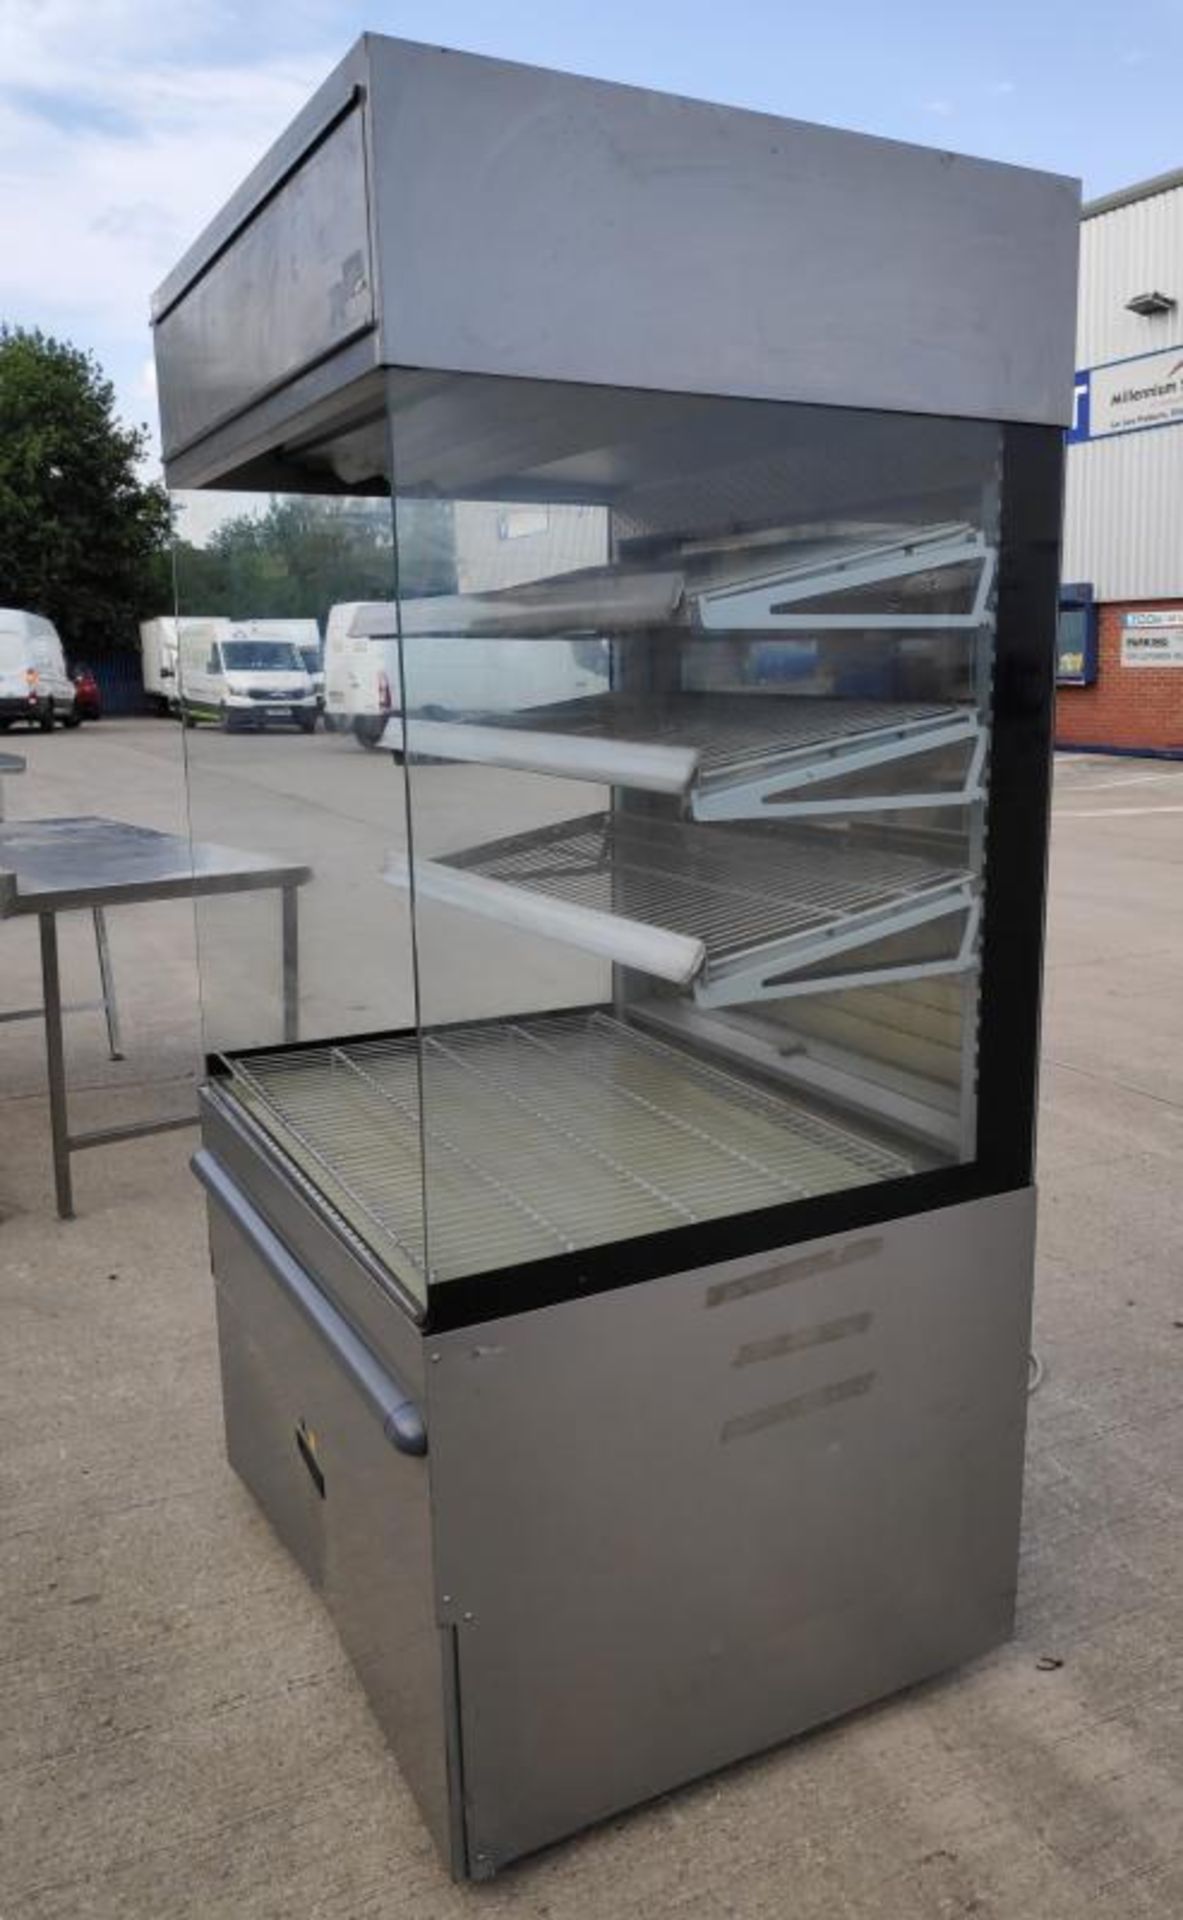 1 x Nuttall 4 Level Open Front Multideck Display Chiller - Wheeled - Dimensions: 196L x 89D x 107W c - Image 12 of 13